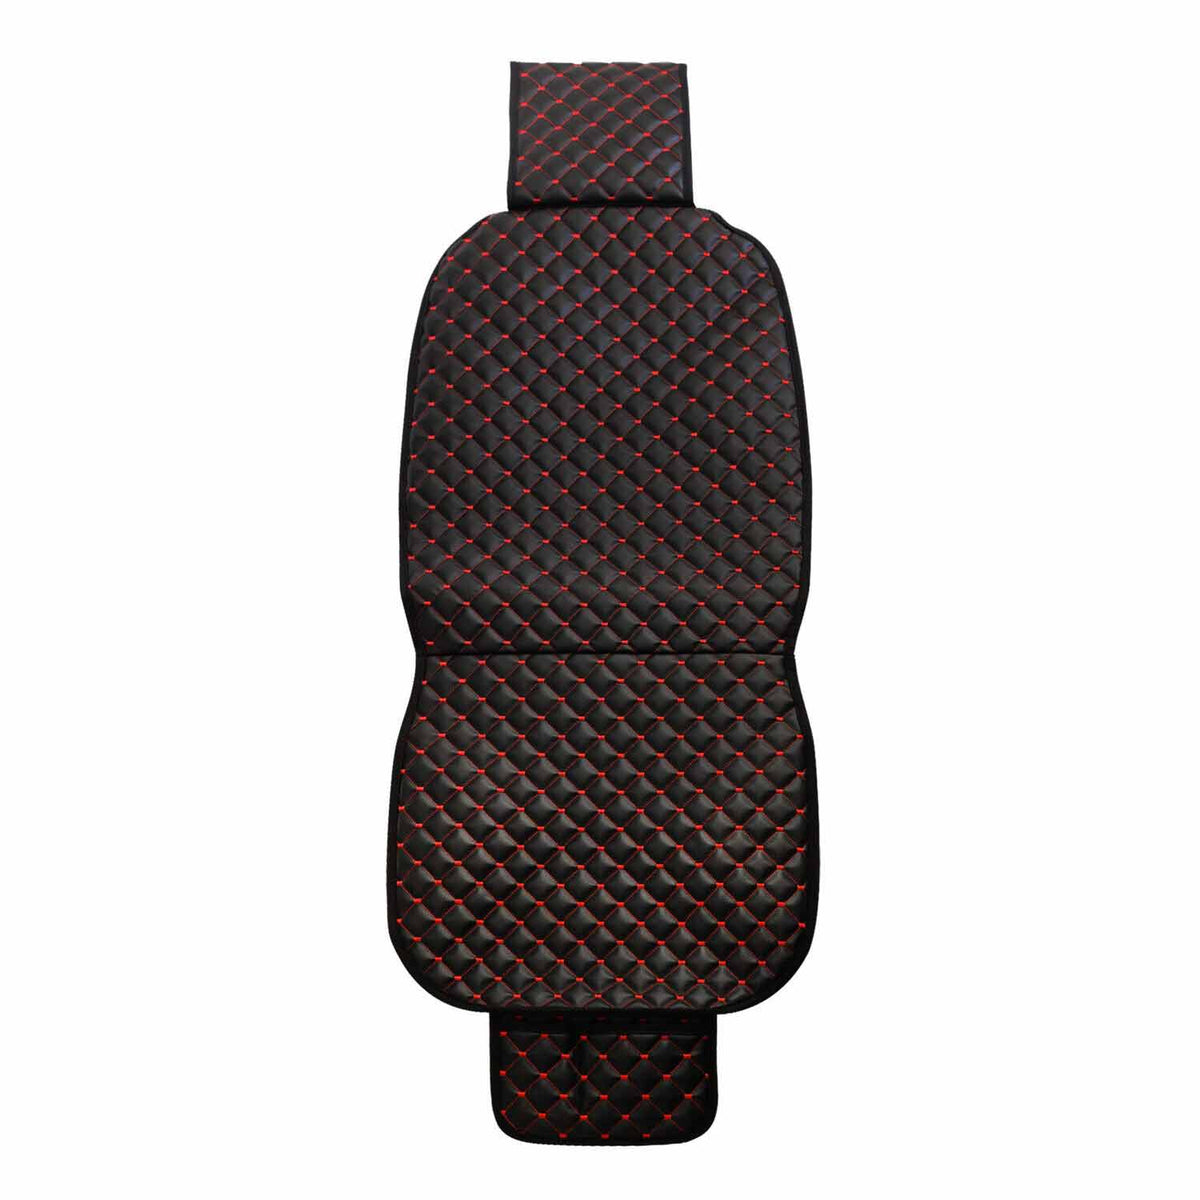 Protective seat cover car seat protector for VW Multivan T7 artificial leather black red